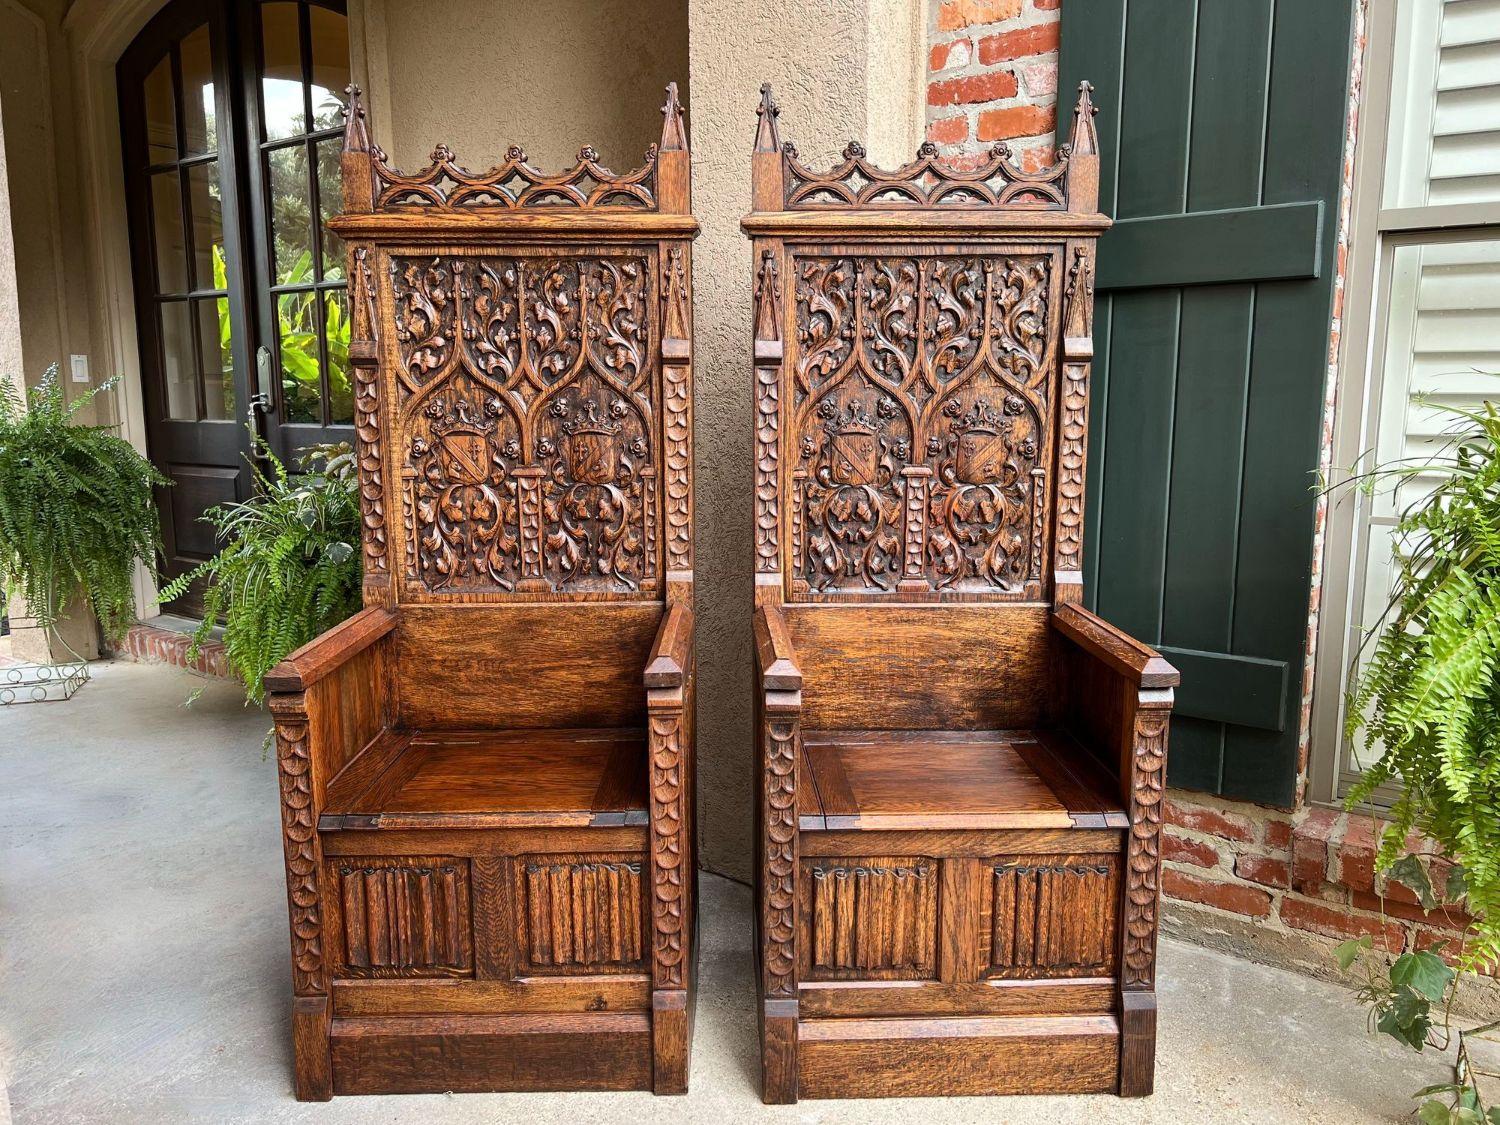 PAIR SET Antique French Hall Bench Gothic Revival Throne Altar Chairs Carved Oak.

Direct from France, a stunning MATCHED PAIR of majestic antique French benches/throne chairs!
Elaborate hand carvings throughout, with cathedral spires flanking the